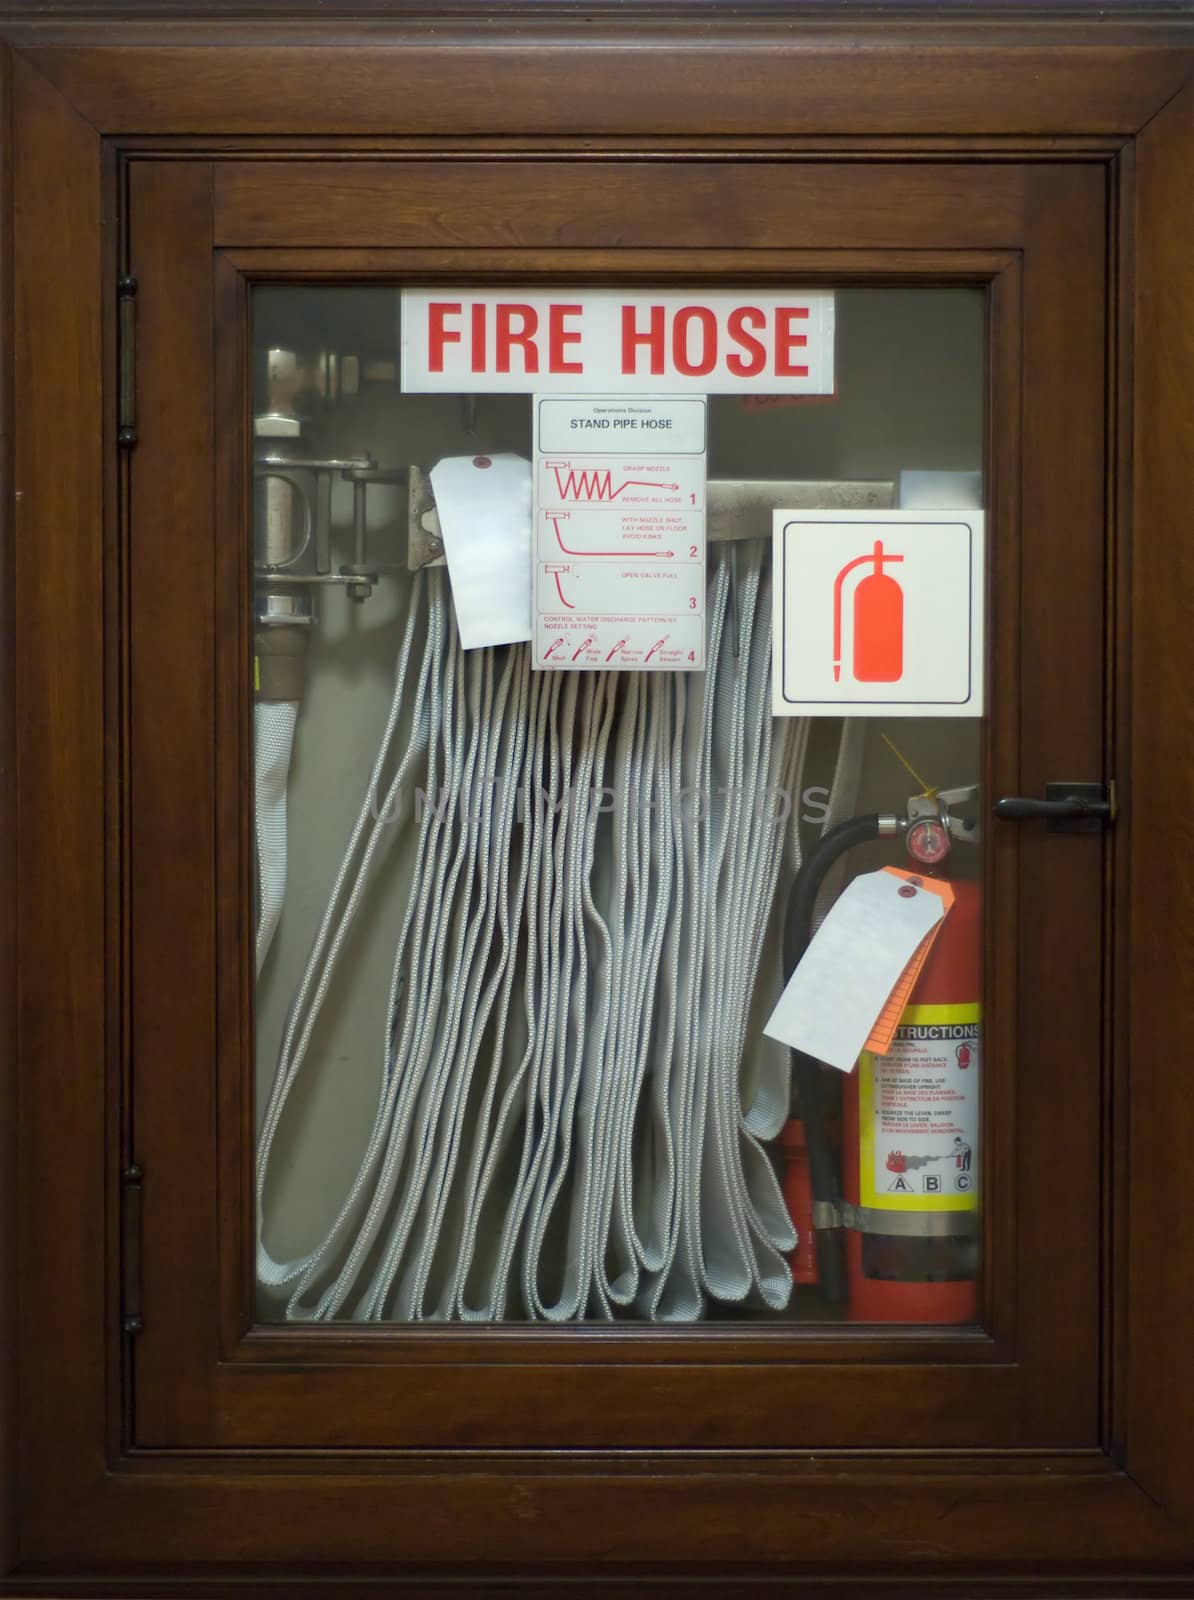 An emergency fire hose enclosed behind glass